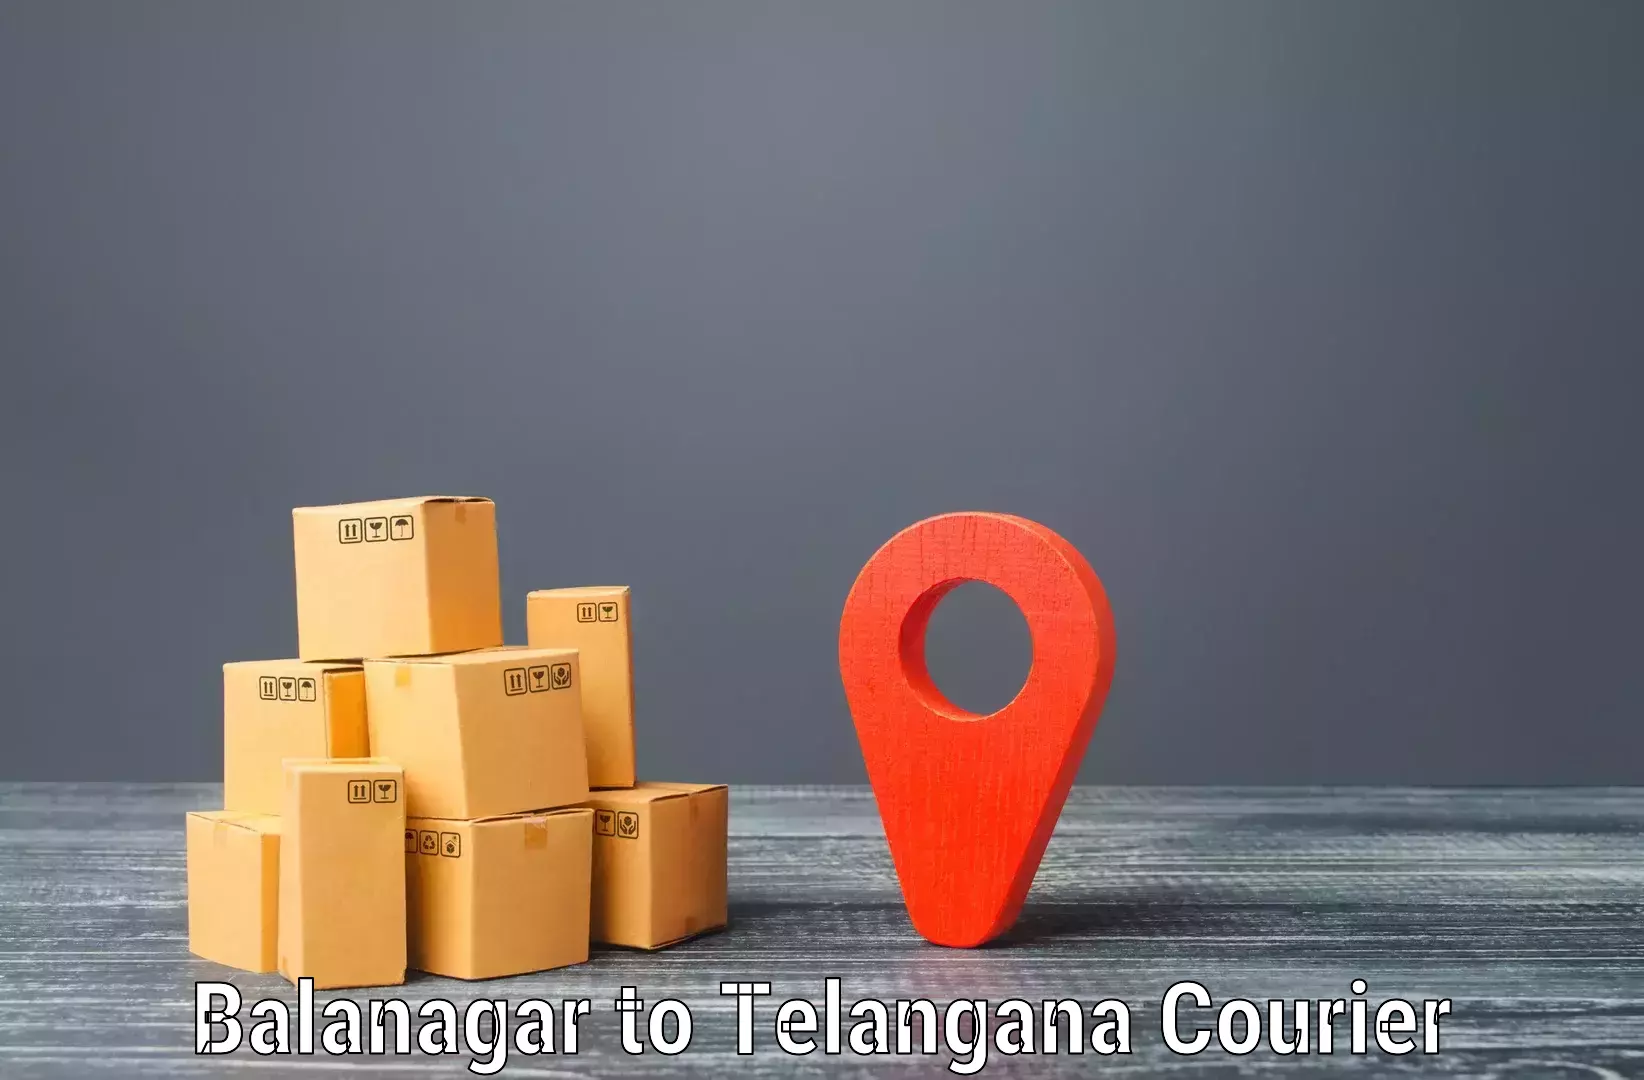 Expedited shipping solutions in Balanagar to Chandur